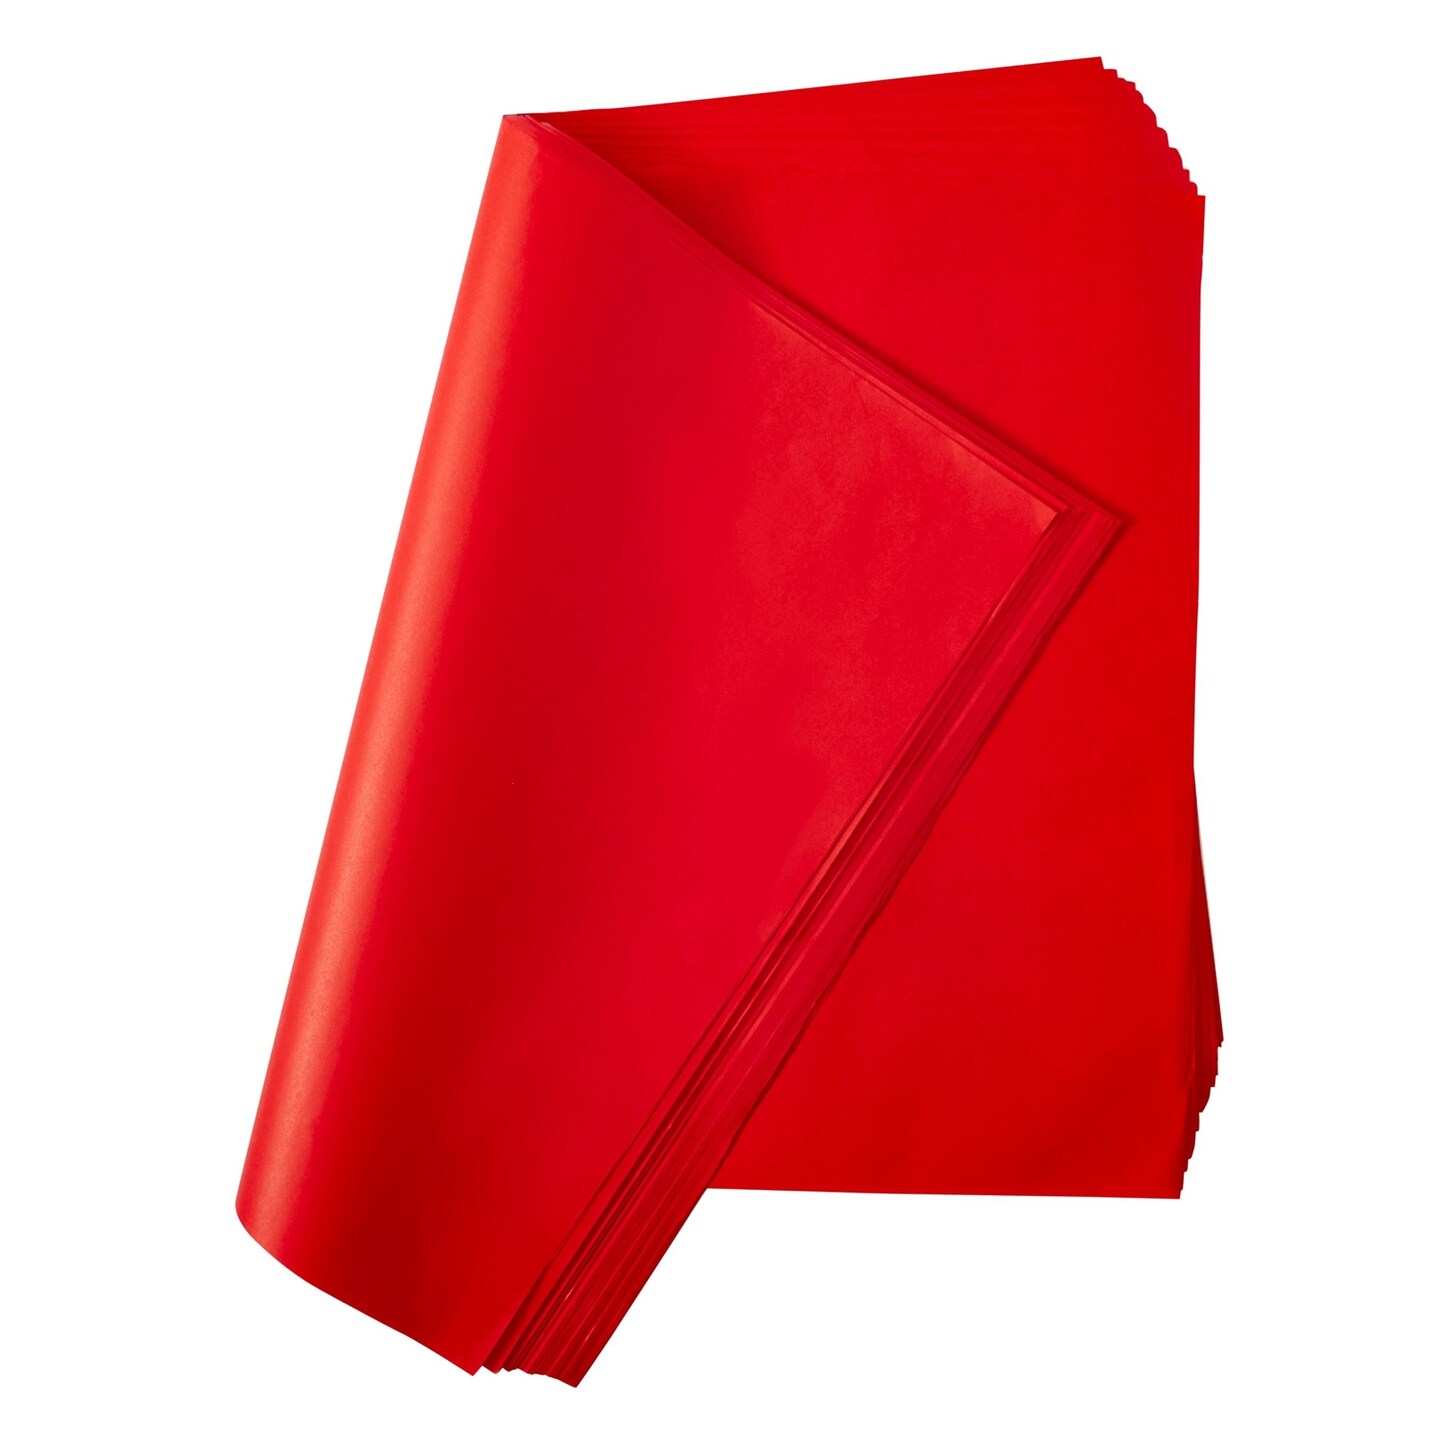 160 Sheets Red Tissue Paper for Gift Wrapping Bags, Bulk Set, 15 x 20, PACK  - Kroger